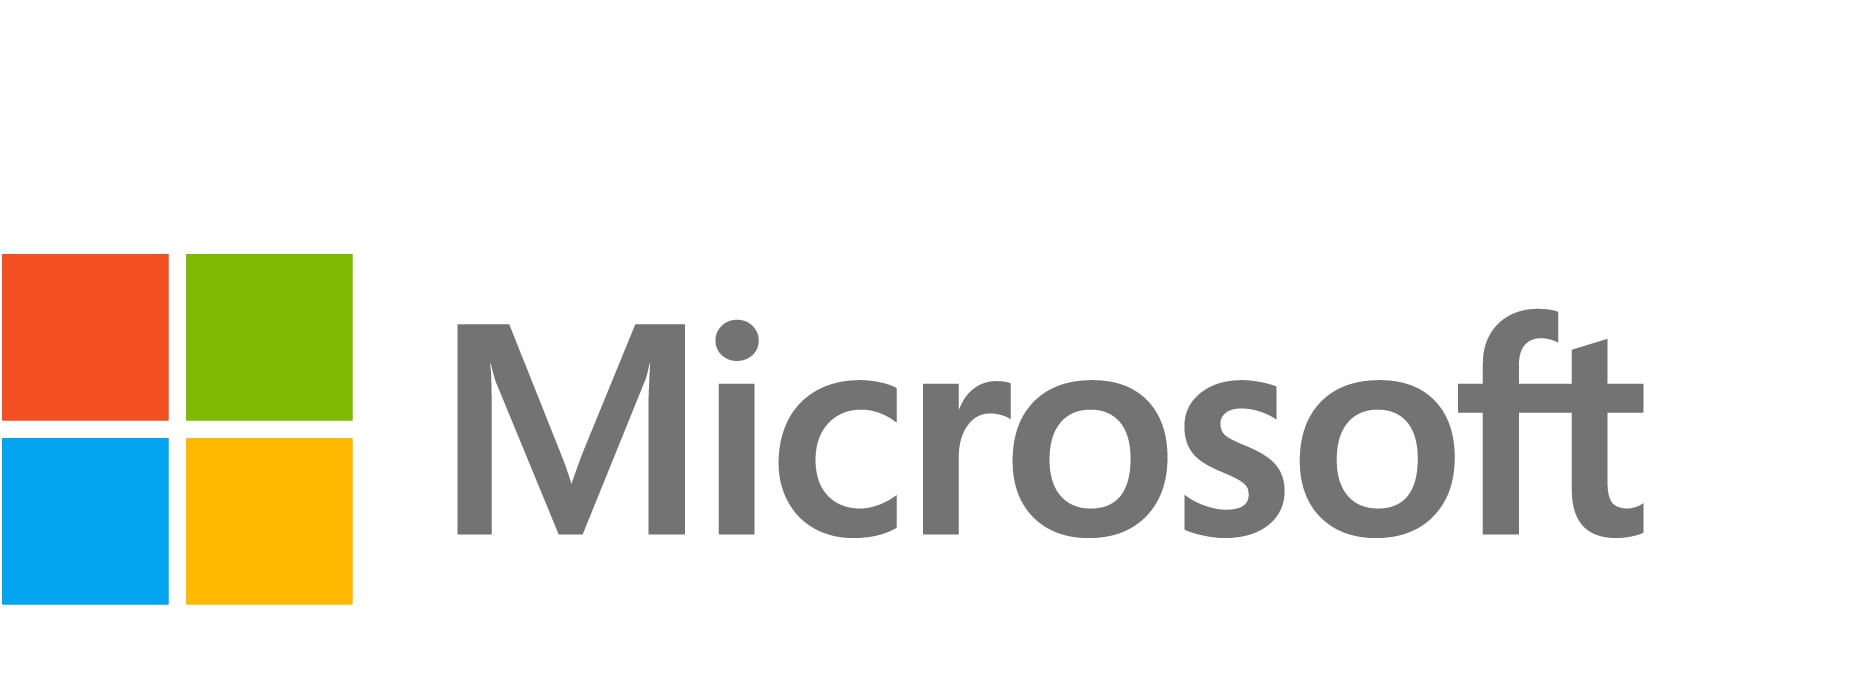 Microsoft Complete for Business Plus - extended service agreement - 3 years